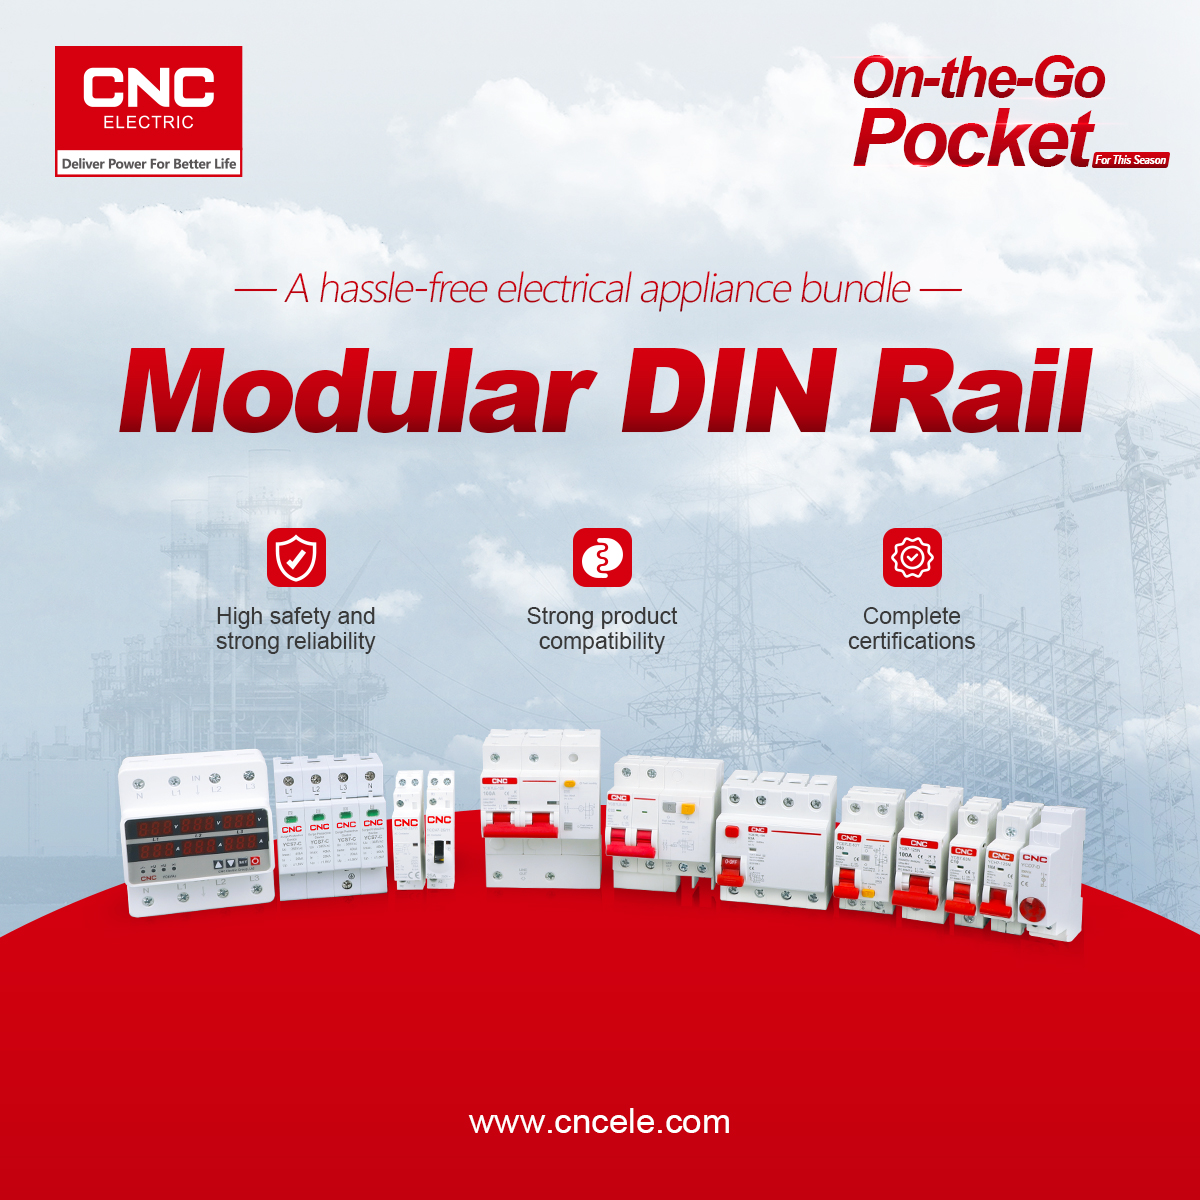 CNC | On-the-Go Pocket Launches First Series of Bestselling and Practical Modular DIN Rail Products